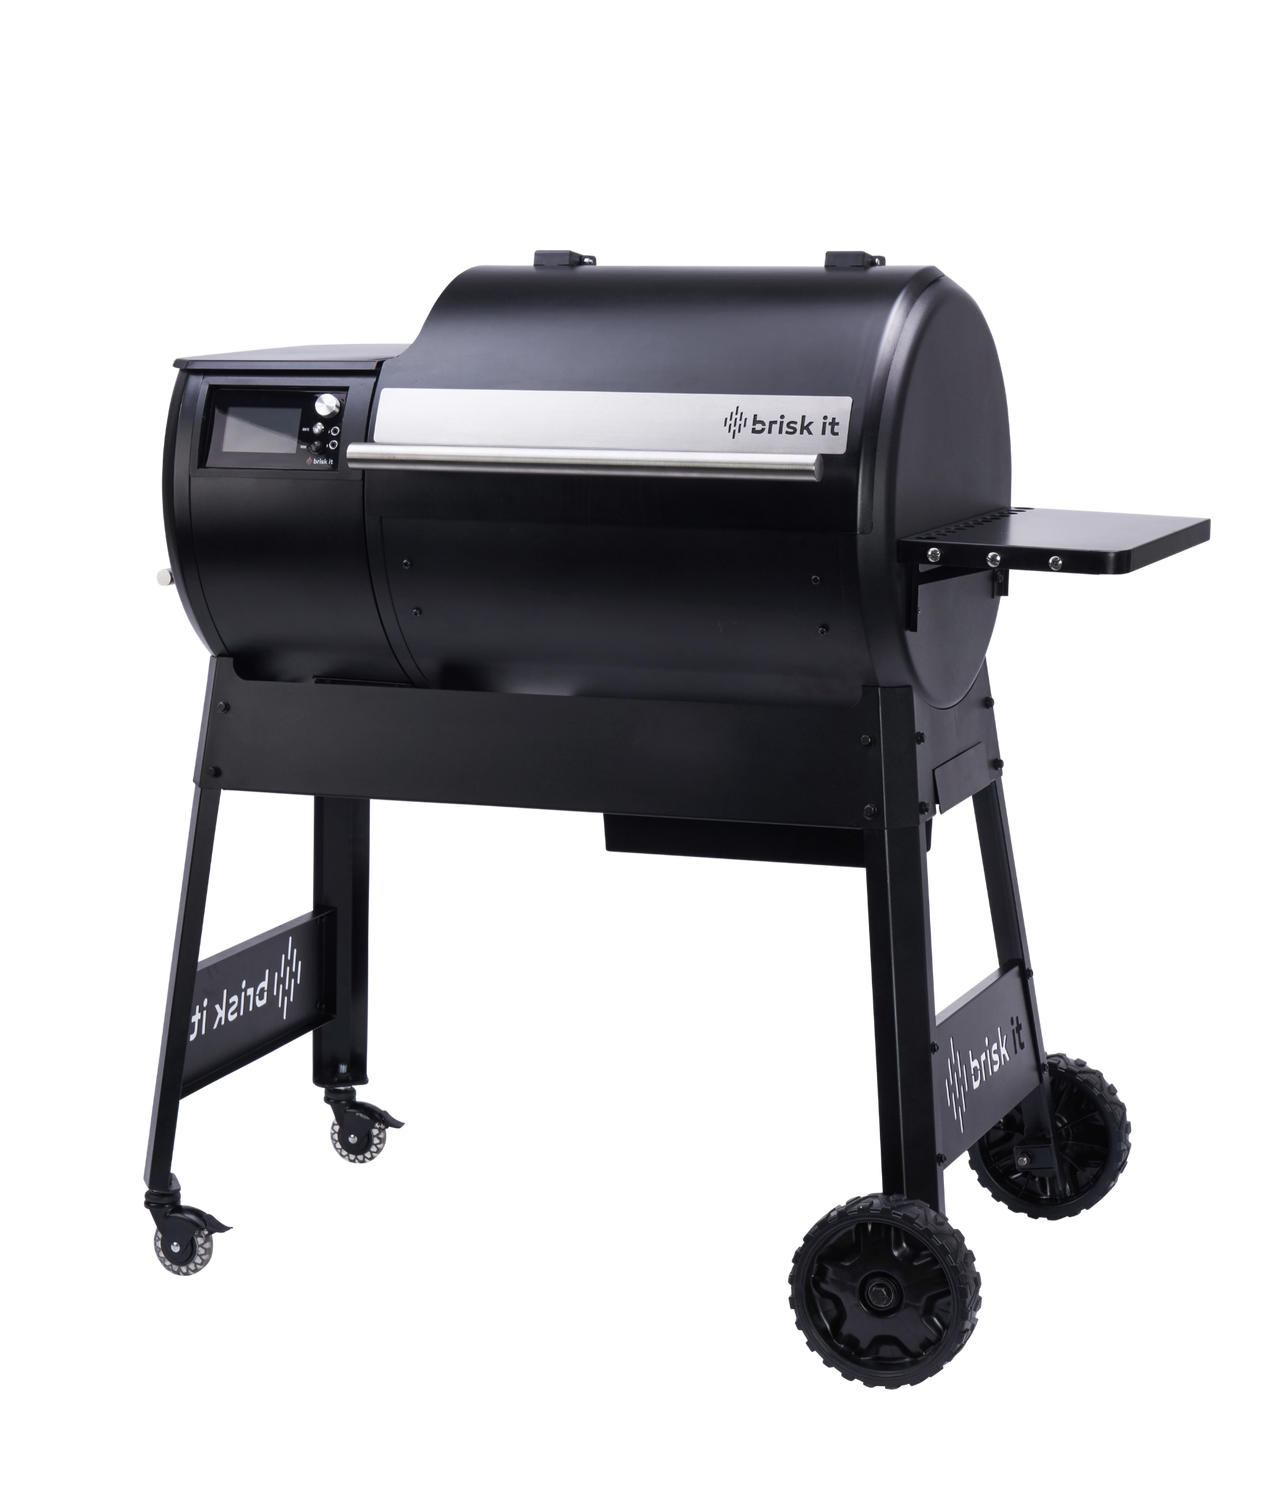 Smart-Enabled Electric Grills : Current Model G Dual-Zone Electric